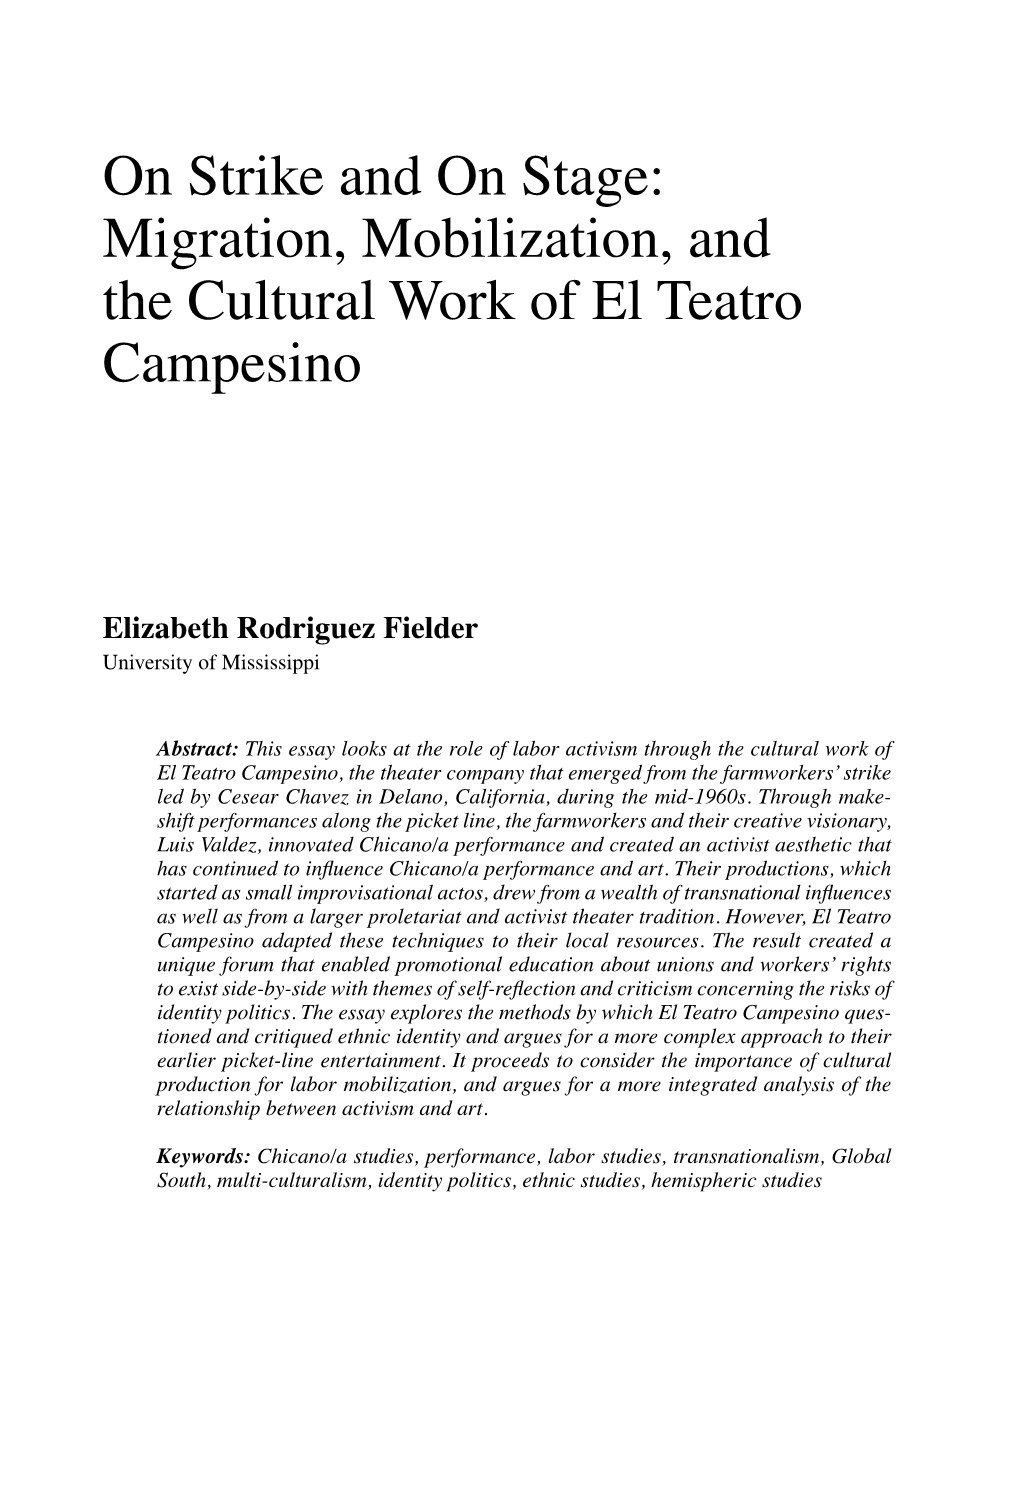 Migration, Mobilization, and the Cultural Work of El Teatro Campesino